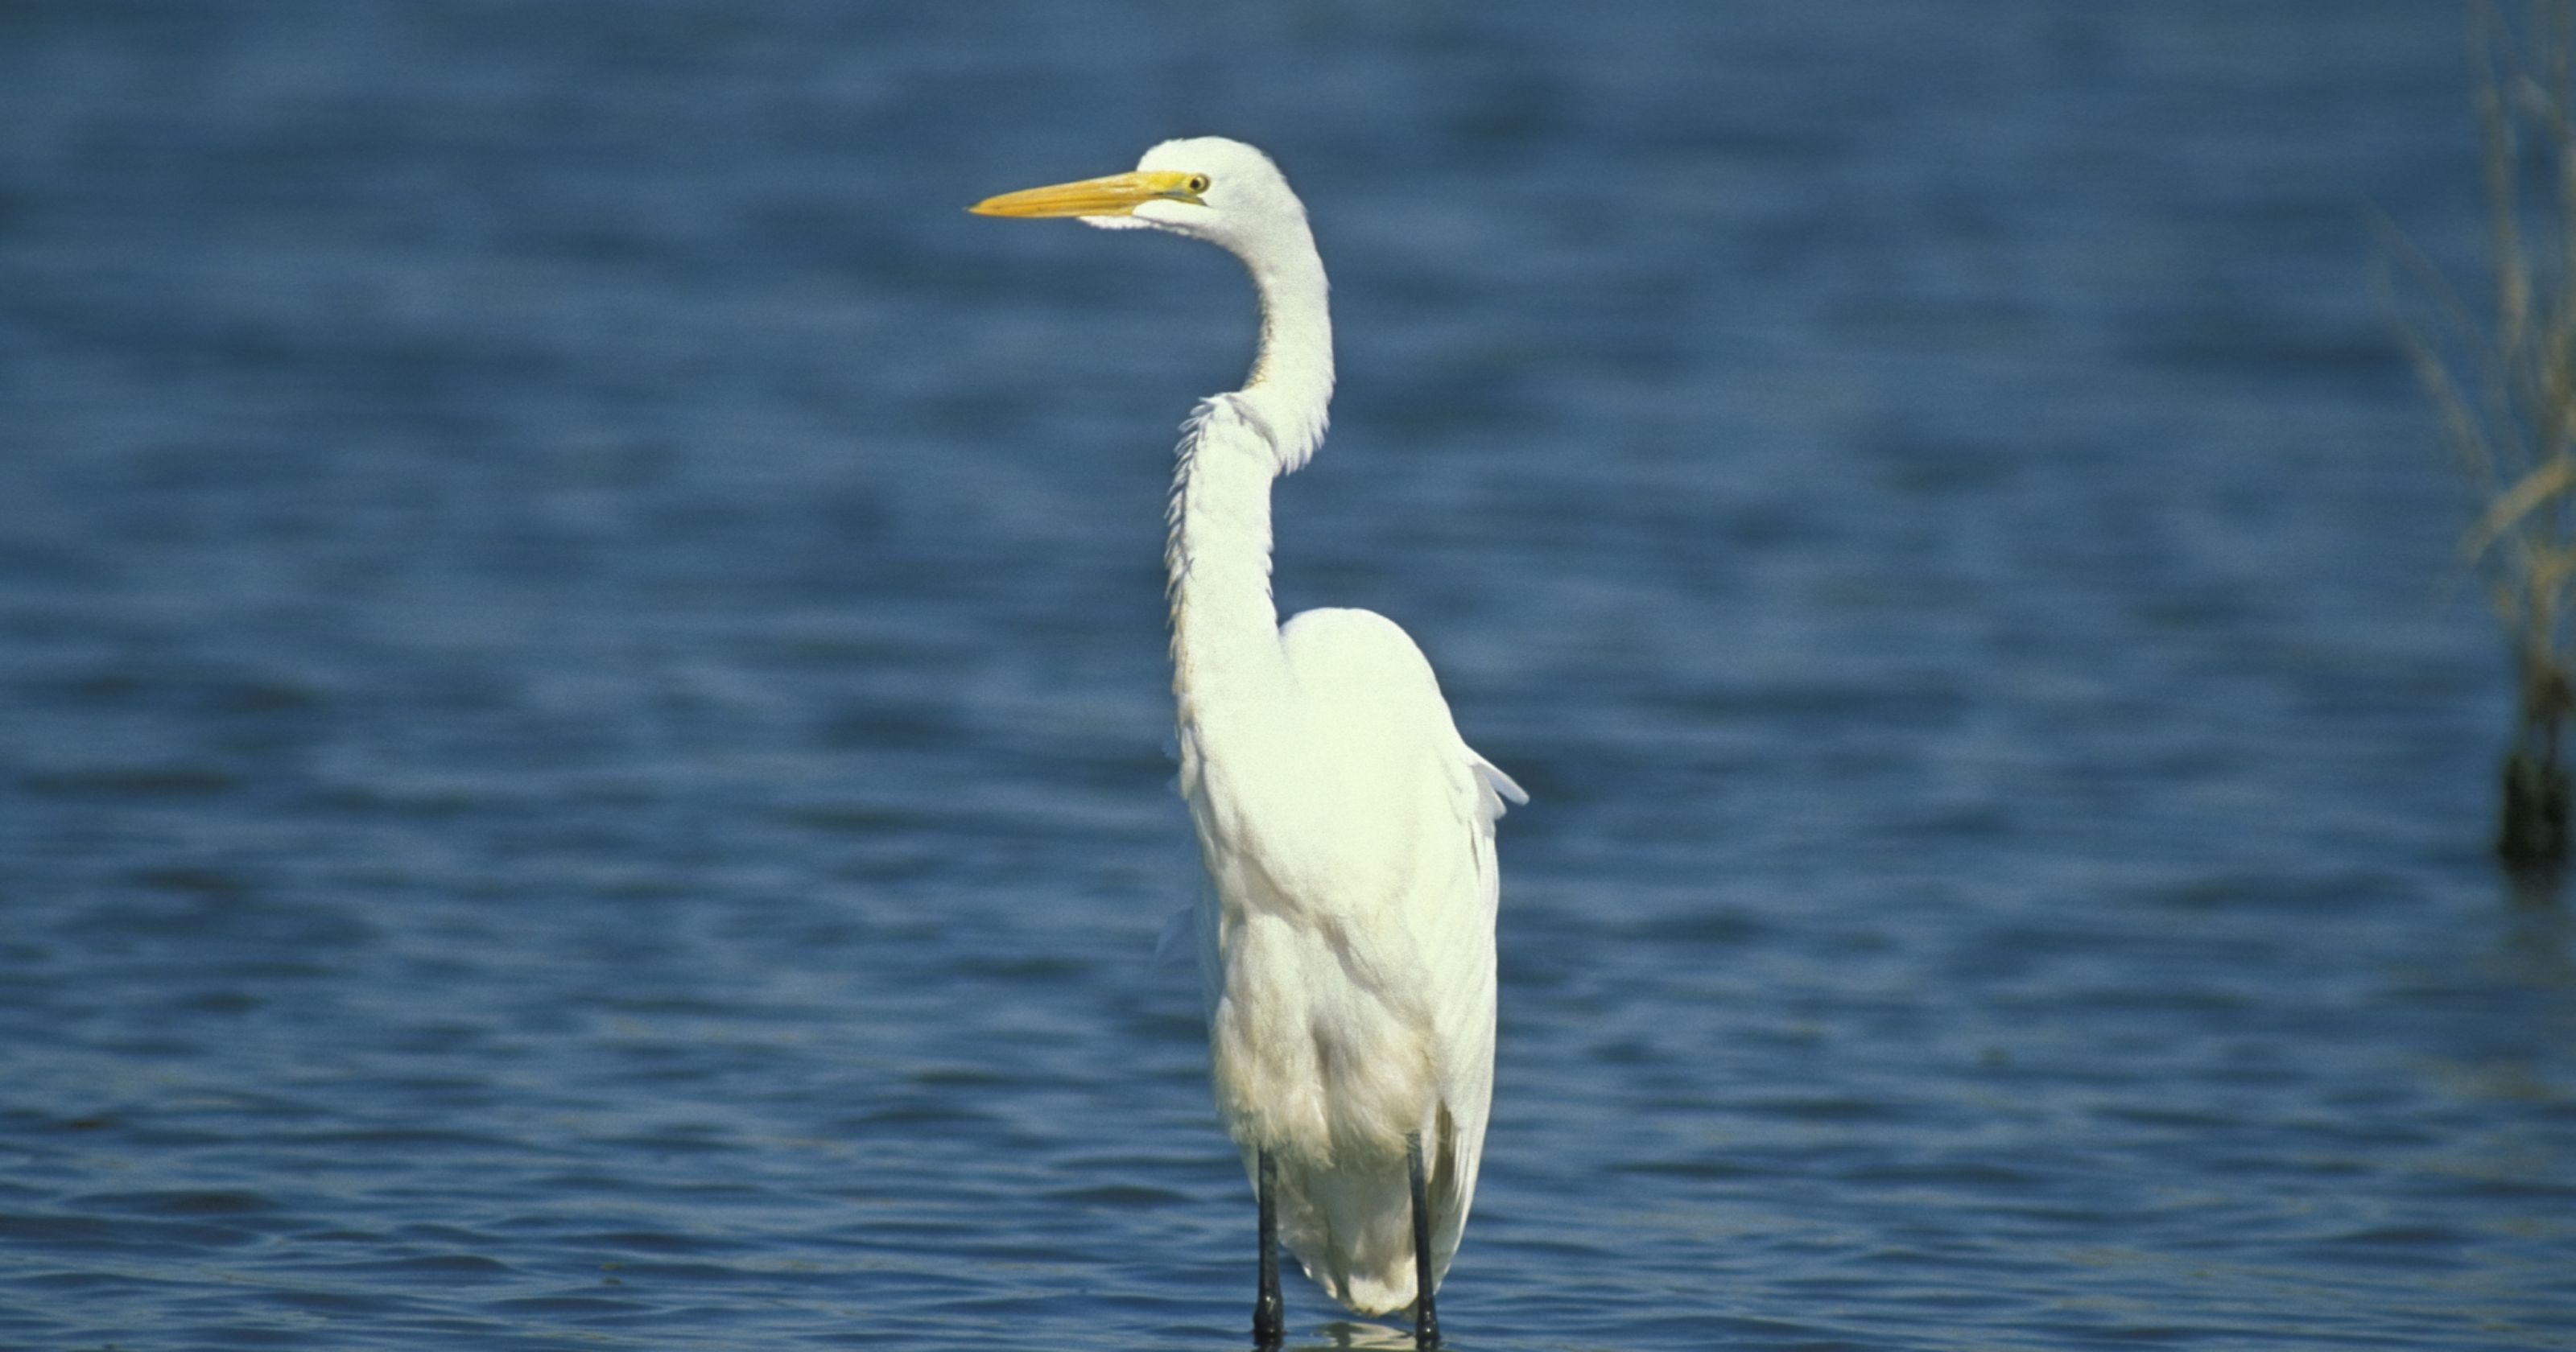 Critter of the week: Great egret